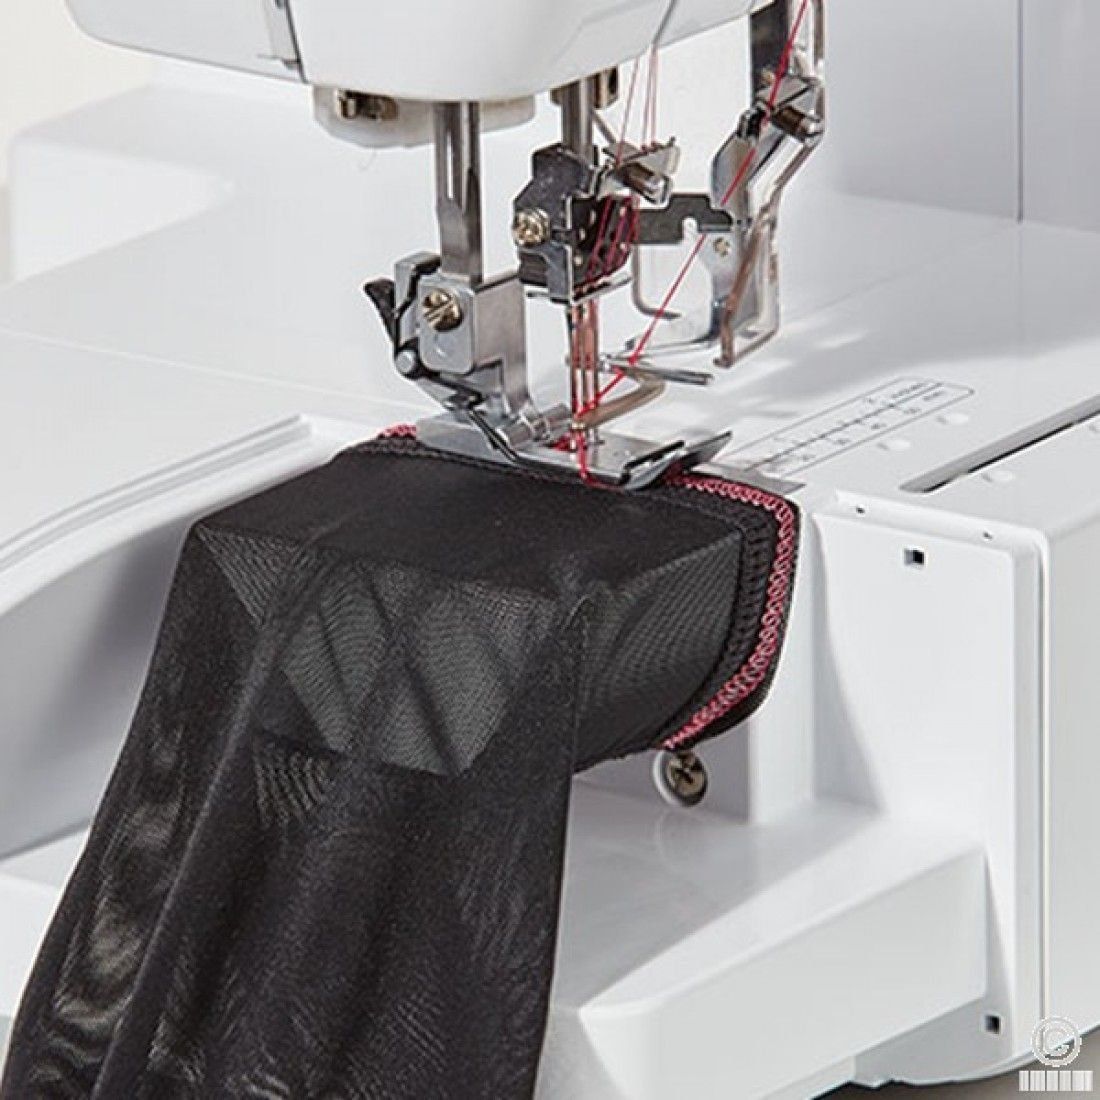 The best cover sewing machines in 2020